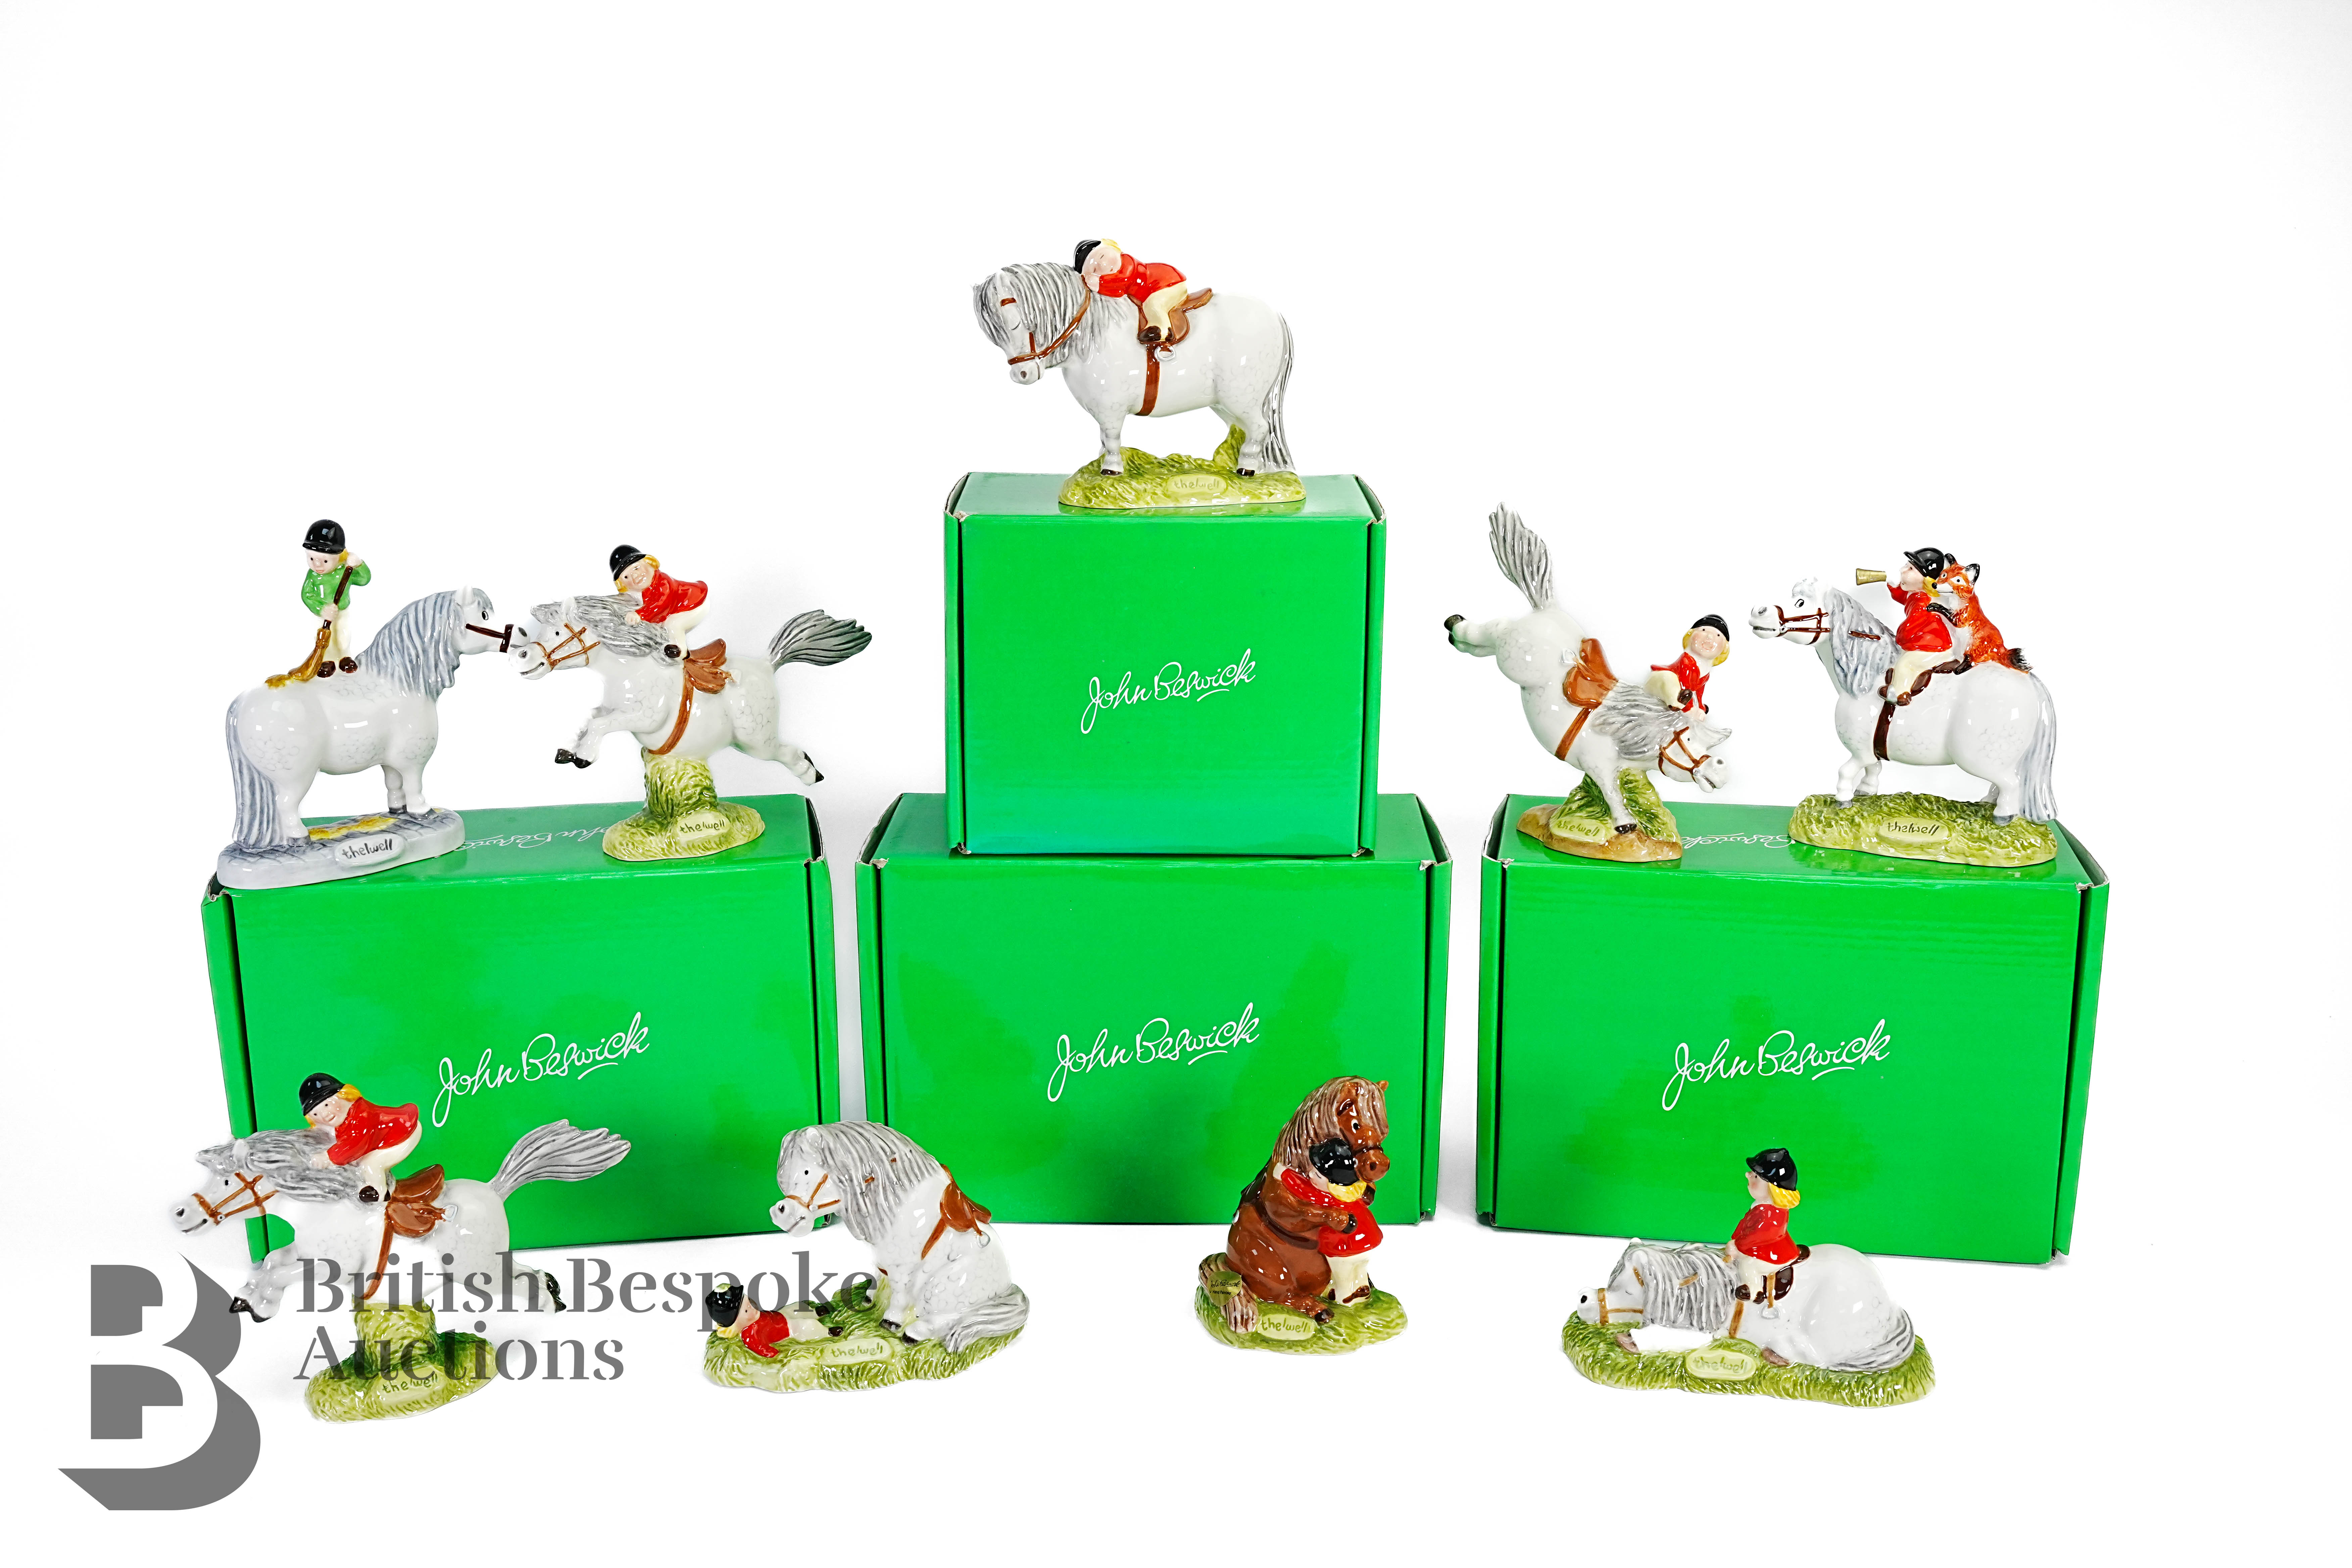 John Beswick Hand Painted Norman Thelwell Figurines